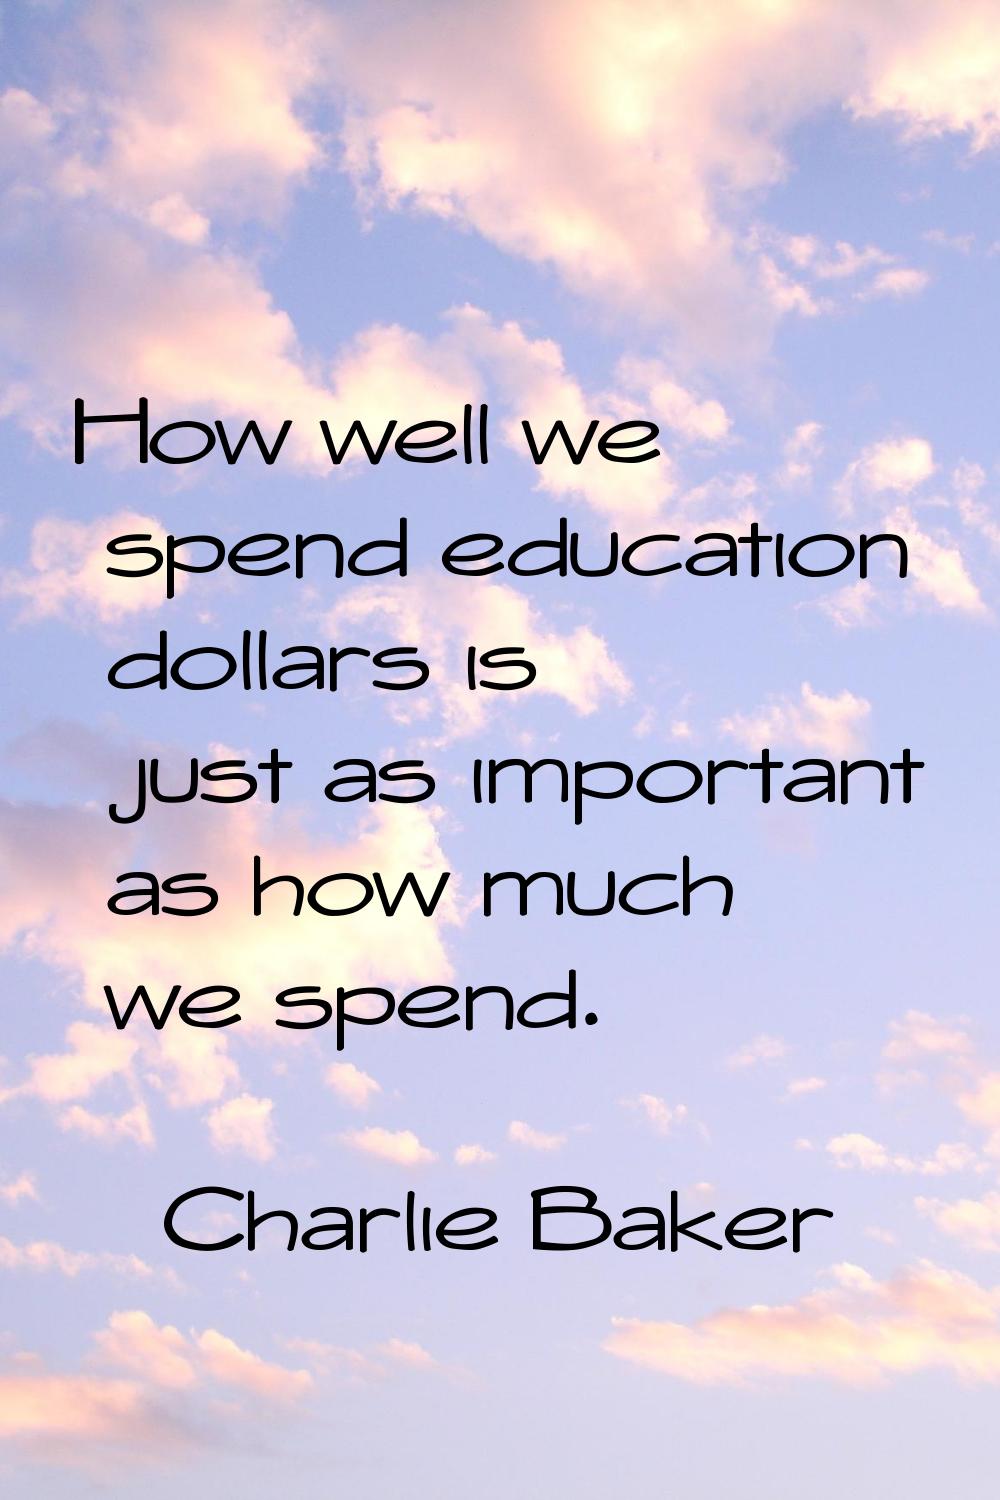 How well we spend education dollars is just as important as how much we spend.